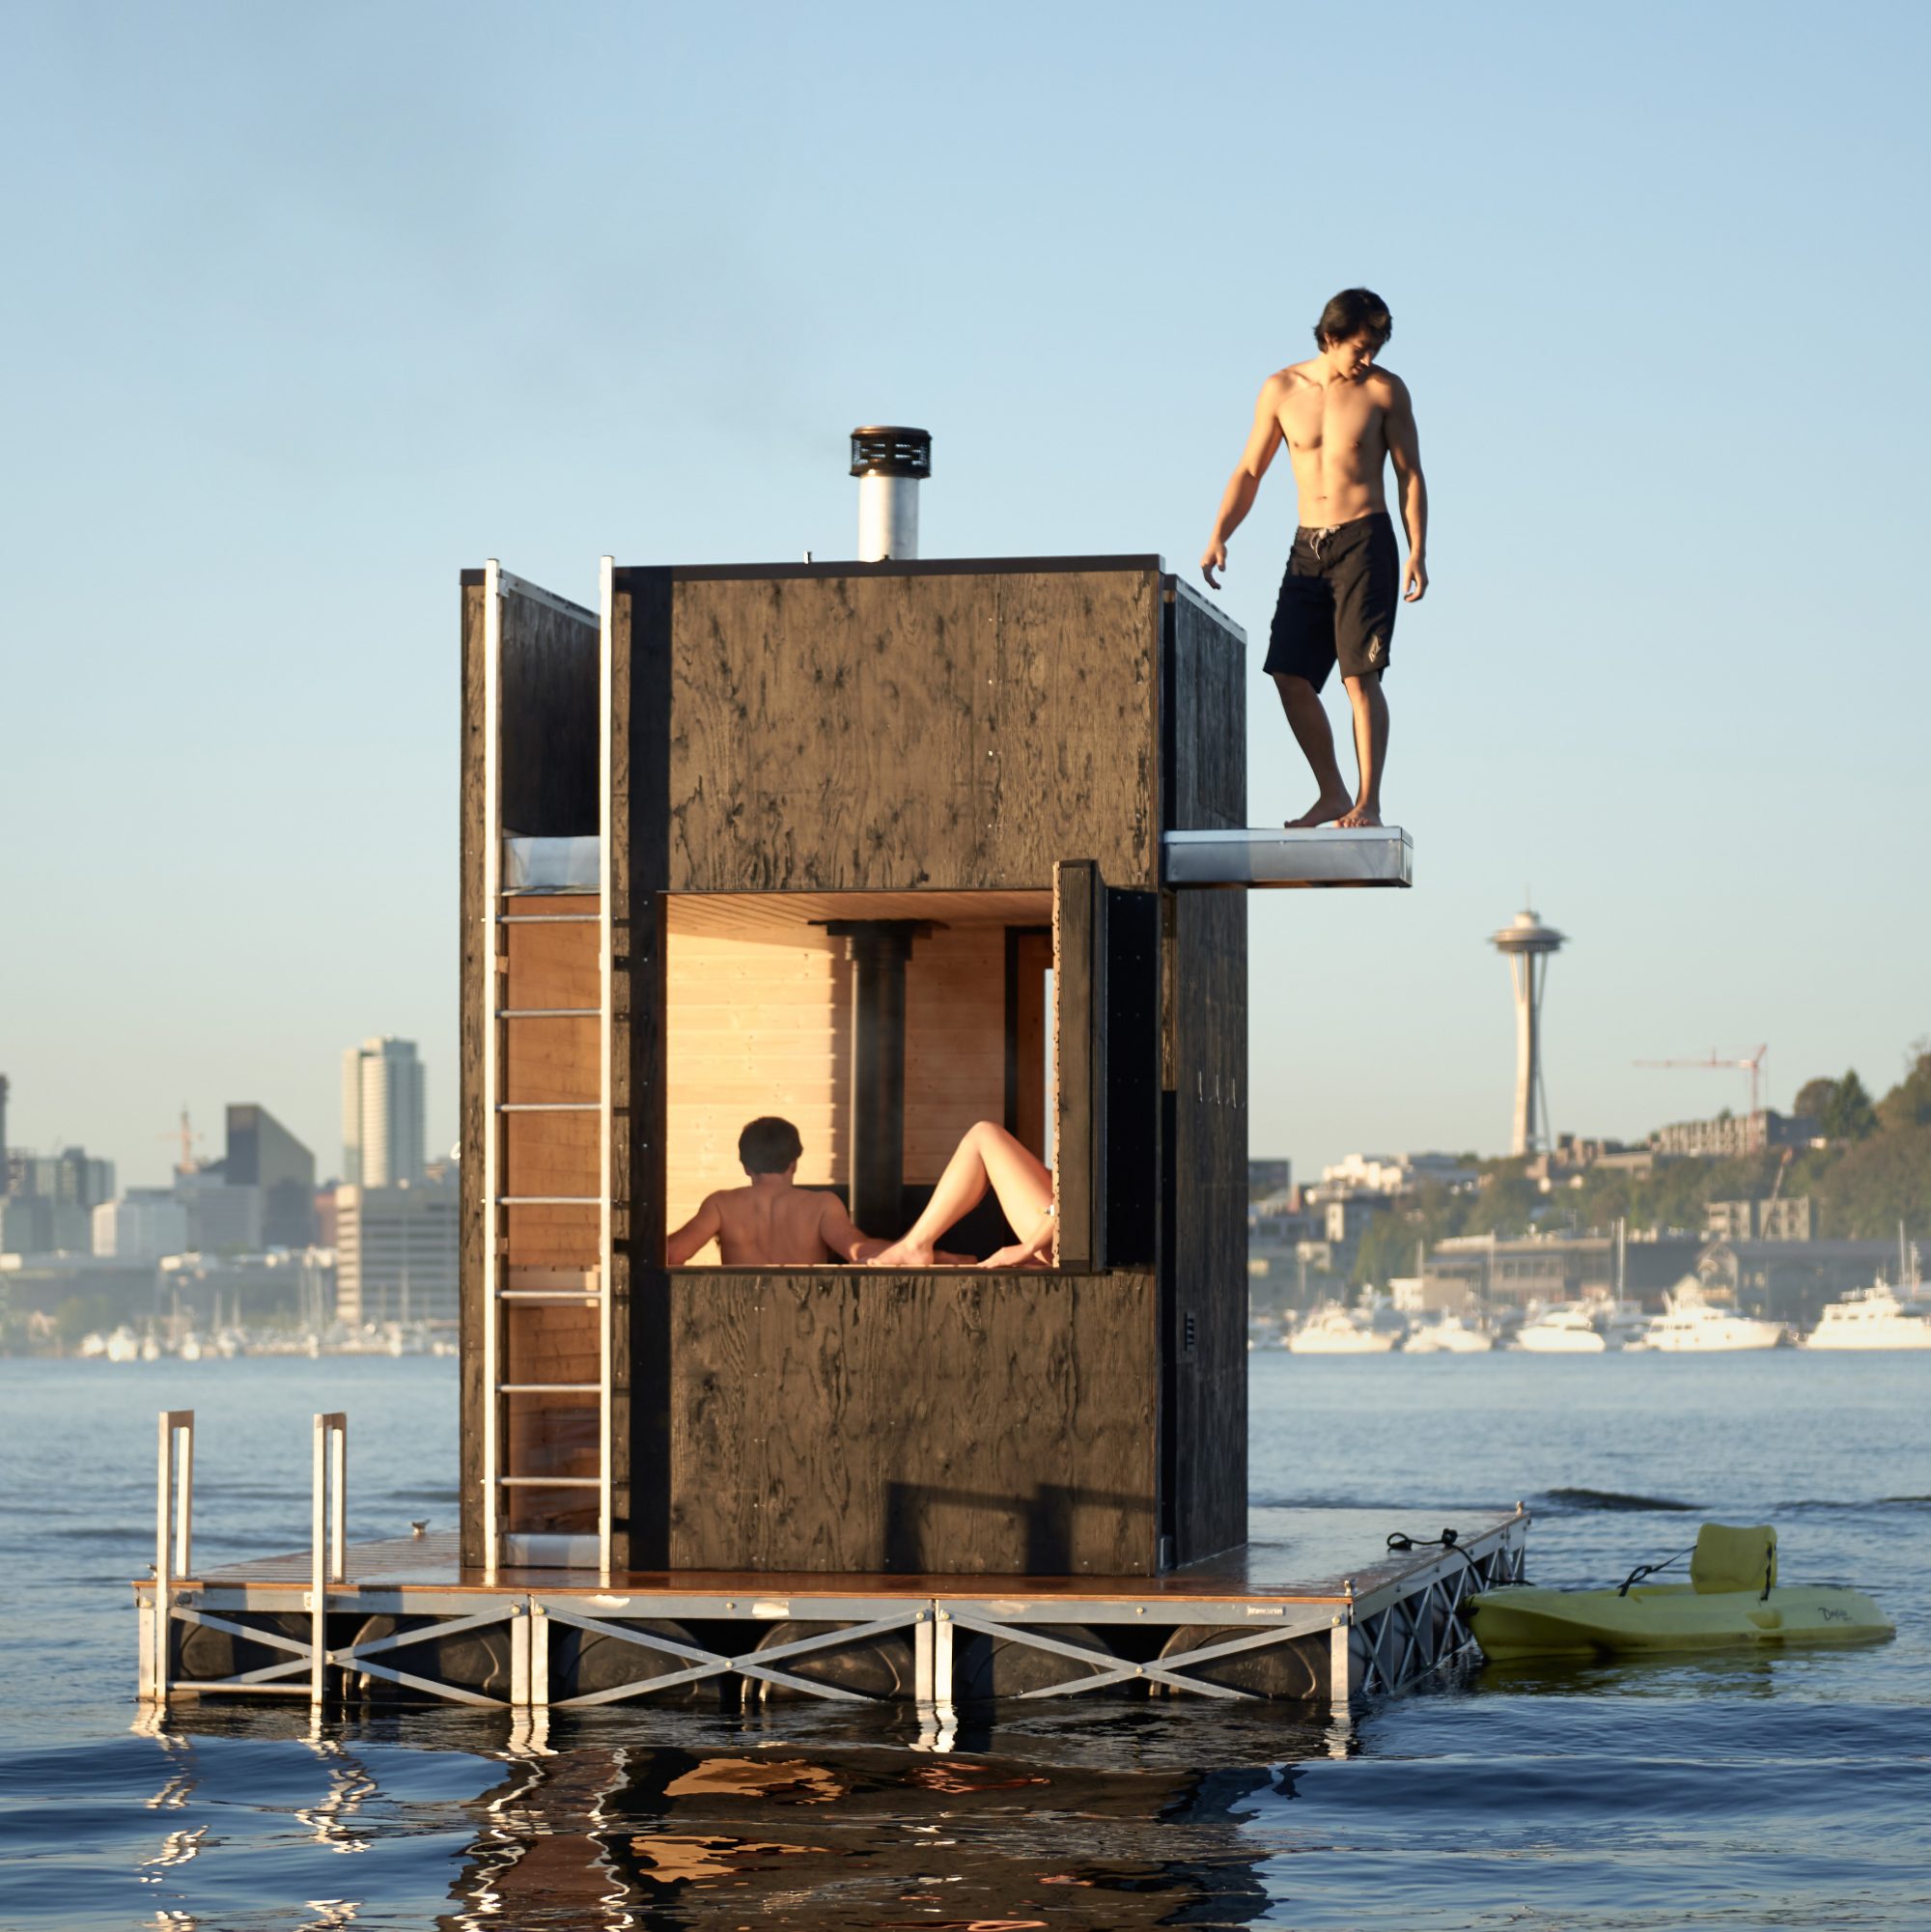 FLOATING SAUNA VIEW OF THE SPACE NEEDLE